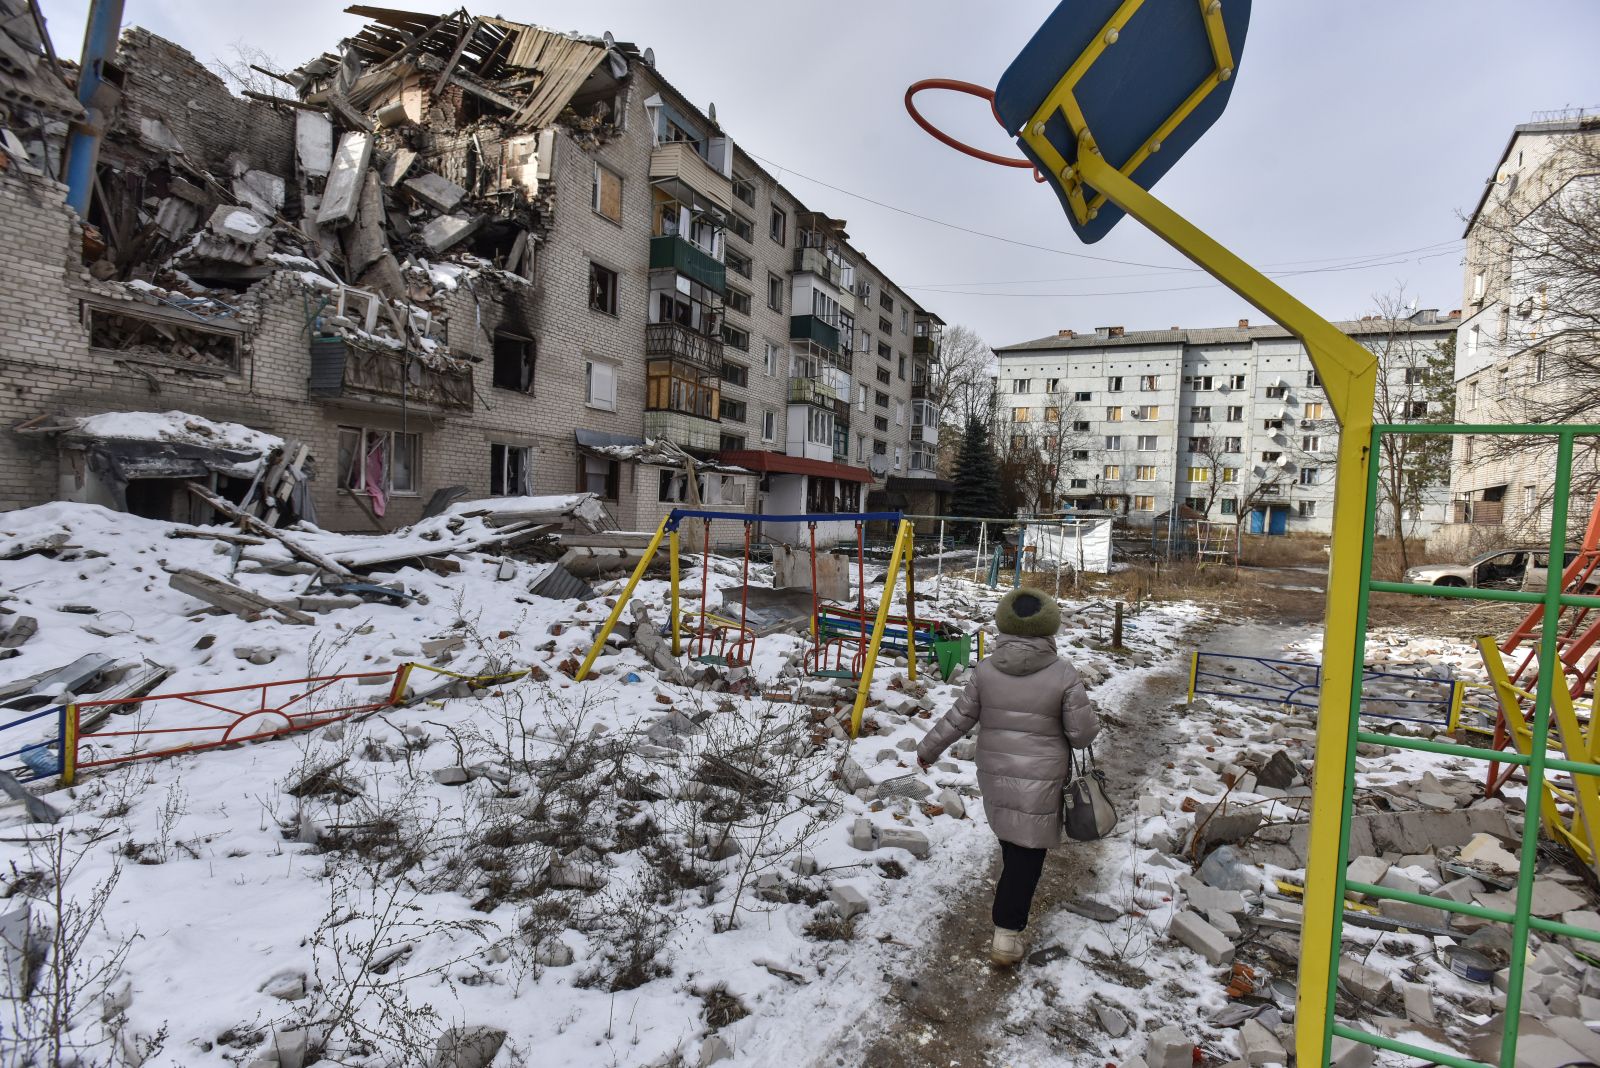 epa10488305 A woman walks past a damaged building in Sviatohirsk, Donetsk region, eastern Ukraine, 24 February 2023. Russian troops entered Ukrainian territory on 24 February 2022, starting a conflict that has provoked destruction and a humanitarian crisis. One year on, fighting continues in many parts of the country.  EPA/OLEG PETRASYUK